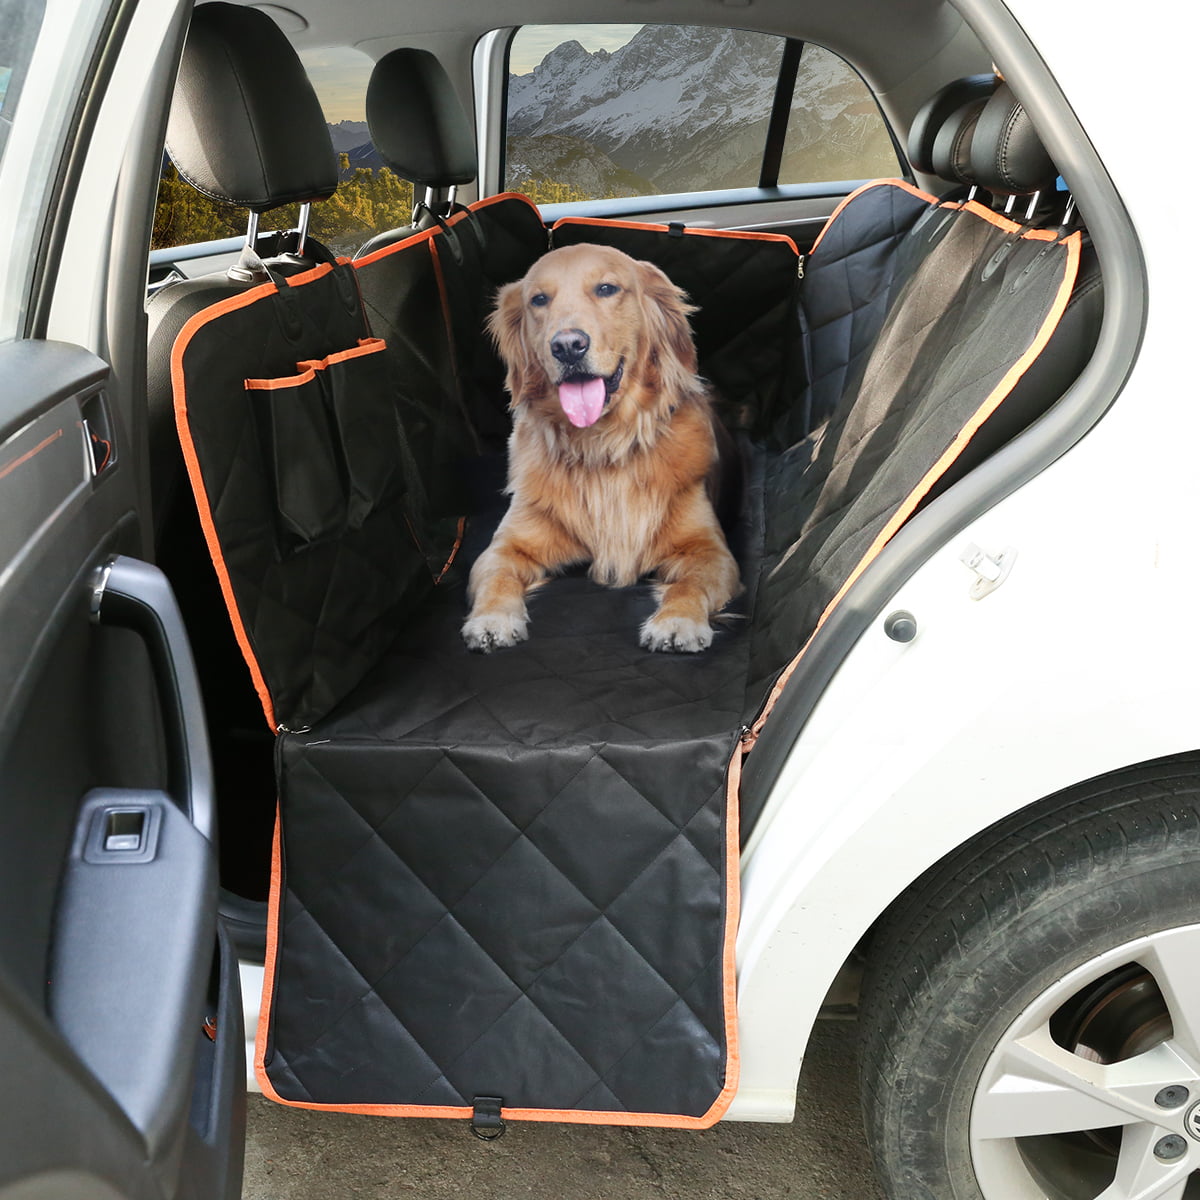 Waterproof Pet Car Seat Covers L Dog Seat Cover for Cars Black with Two Dog Seat Belt and a Cleaning Brush Dog Hammock Slip-proof Heavy Duty Rear Seat Protector